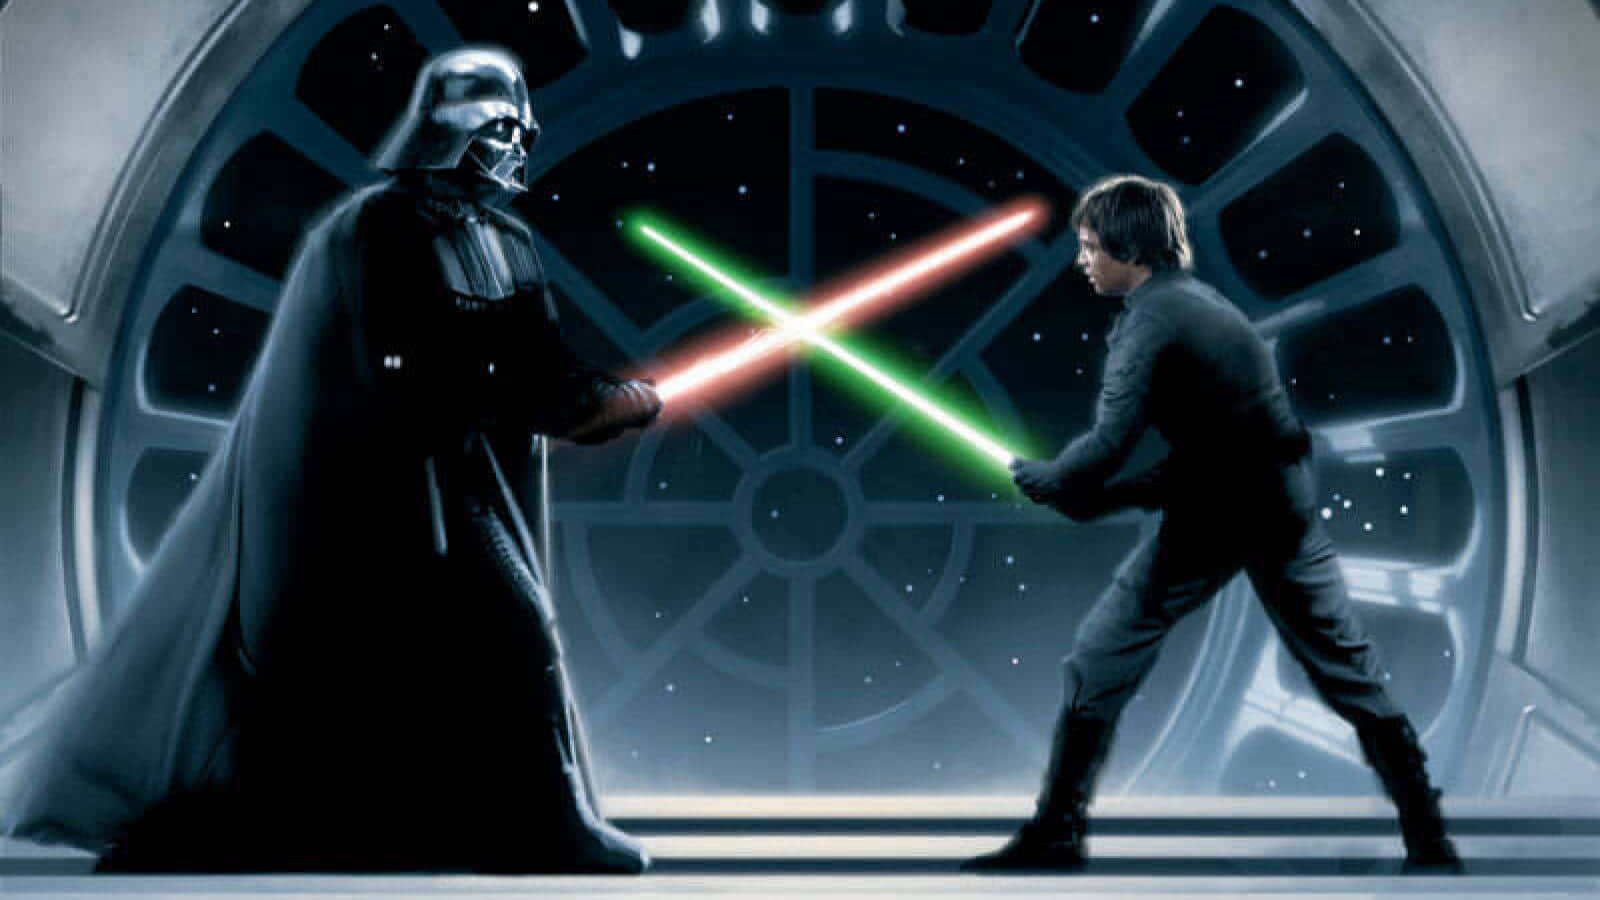 Iconic scene in Return of the Jedi with Luke Skywalker and Darth Vader Wallpaper